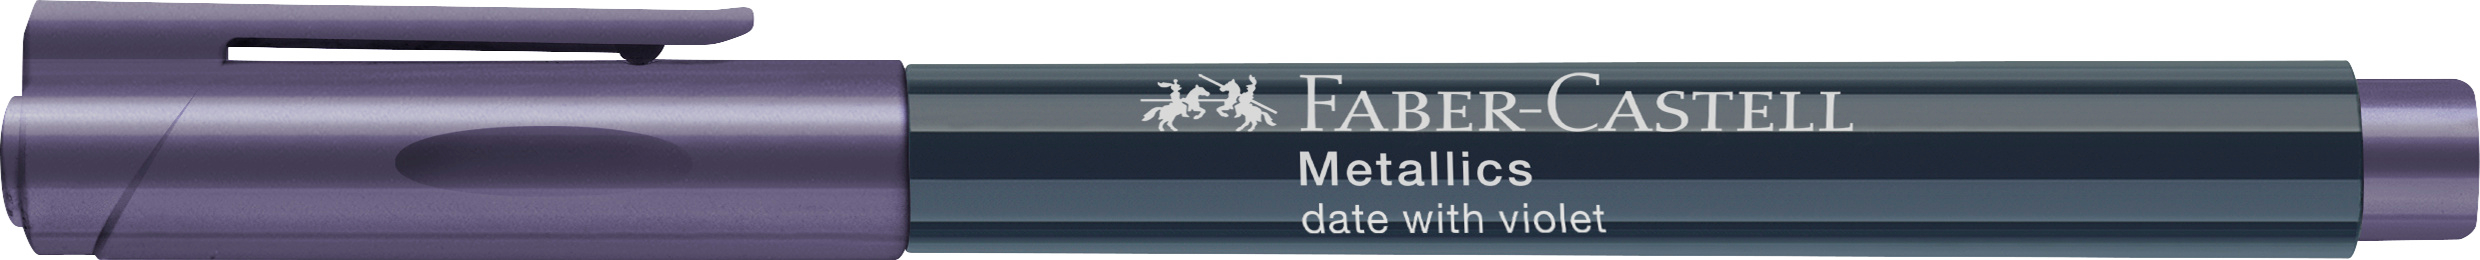 FABER-CASTELL Metallics Marker 1.5 mm 160736 Date with violet Date with violet